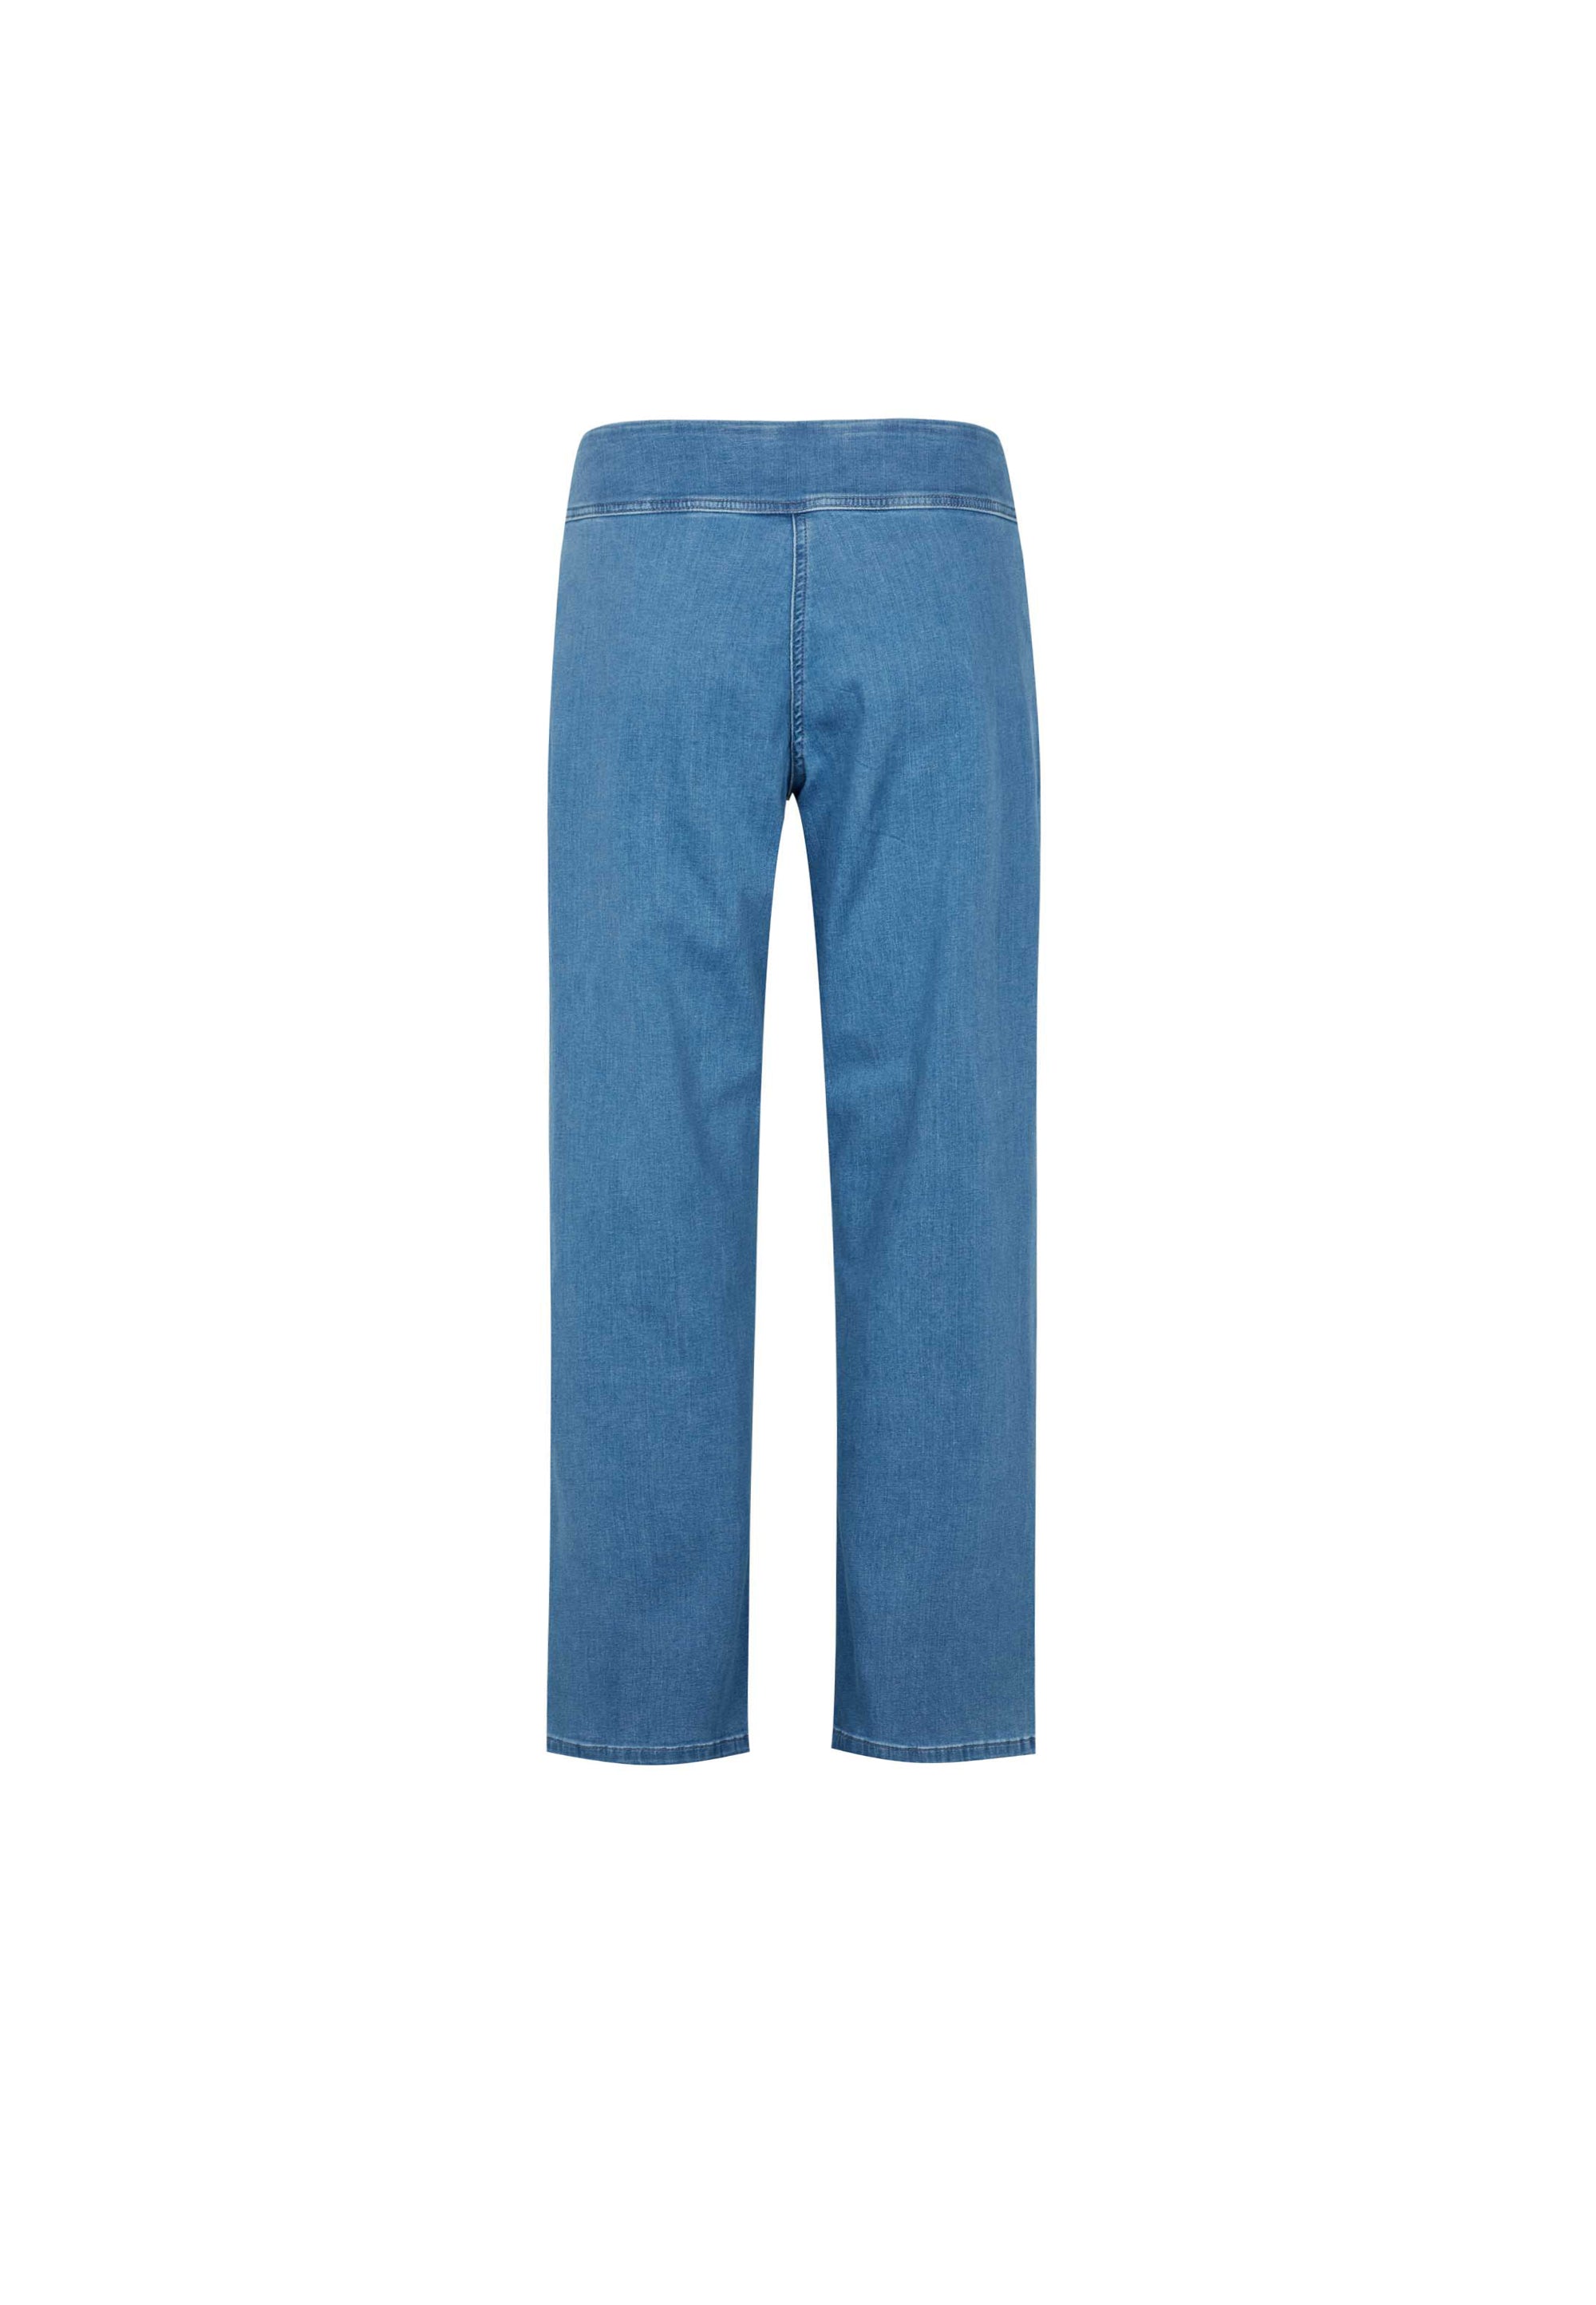 LAURIE Thea Straight - Short Length Trousers STRAIGHT 49350 Light Blue Denim